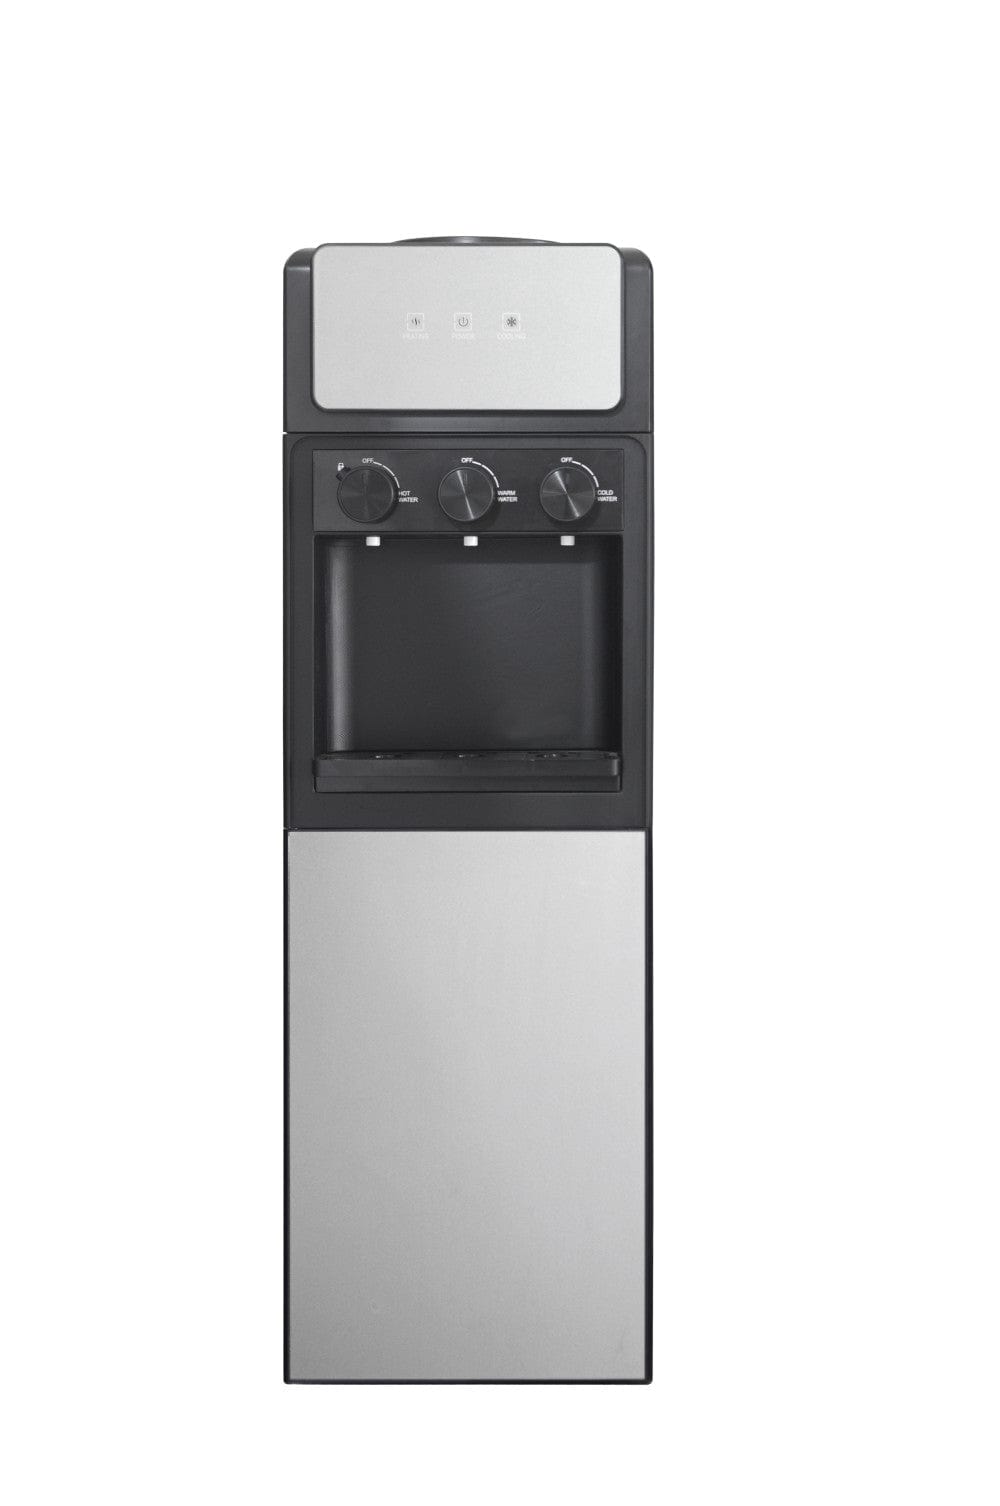 Hoover 3 Tap Top Loading Water Dispenser With Cabinet-HWD-SC-02S